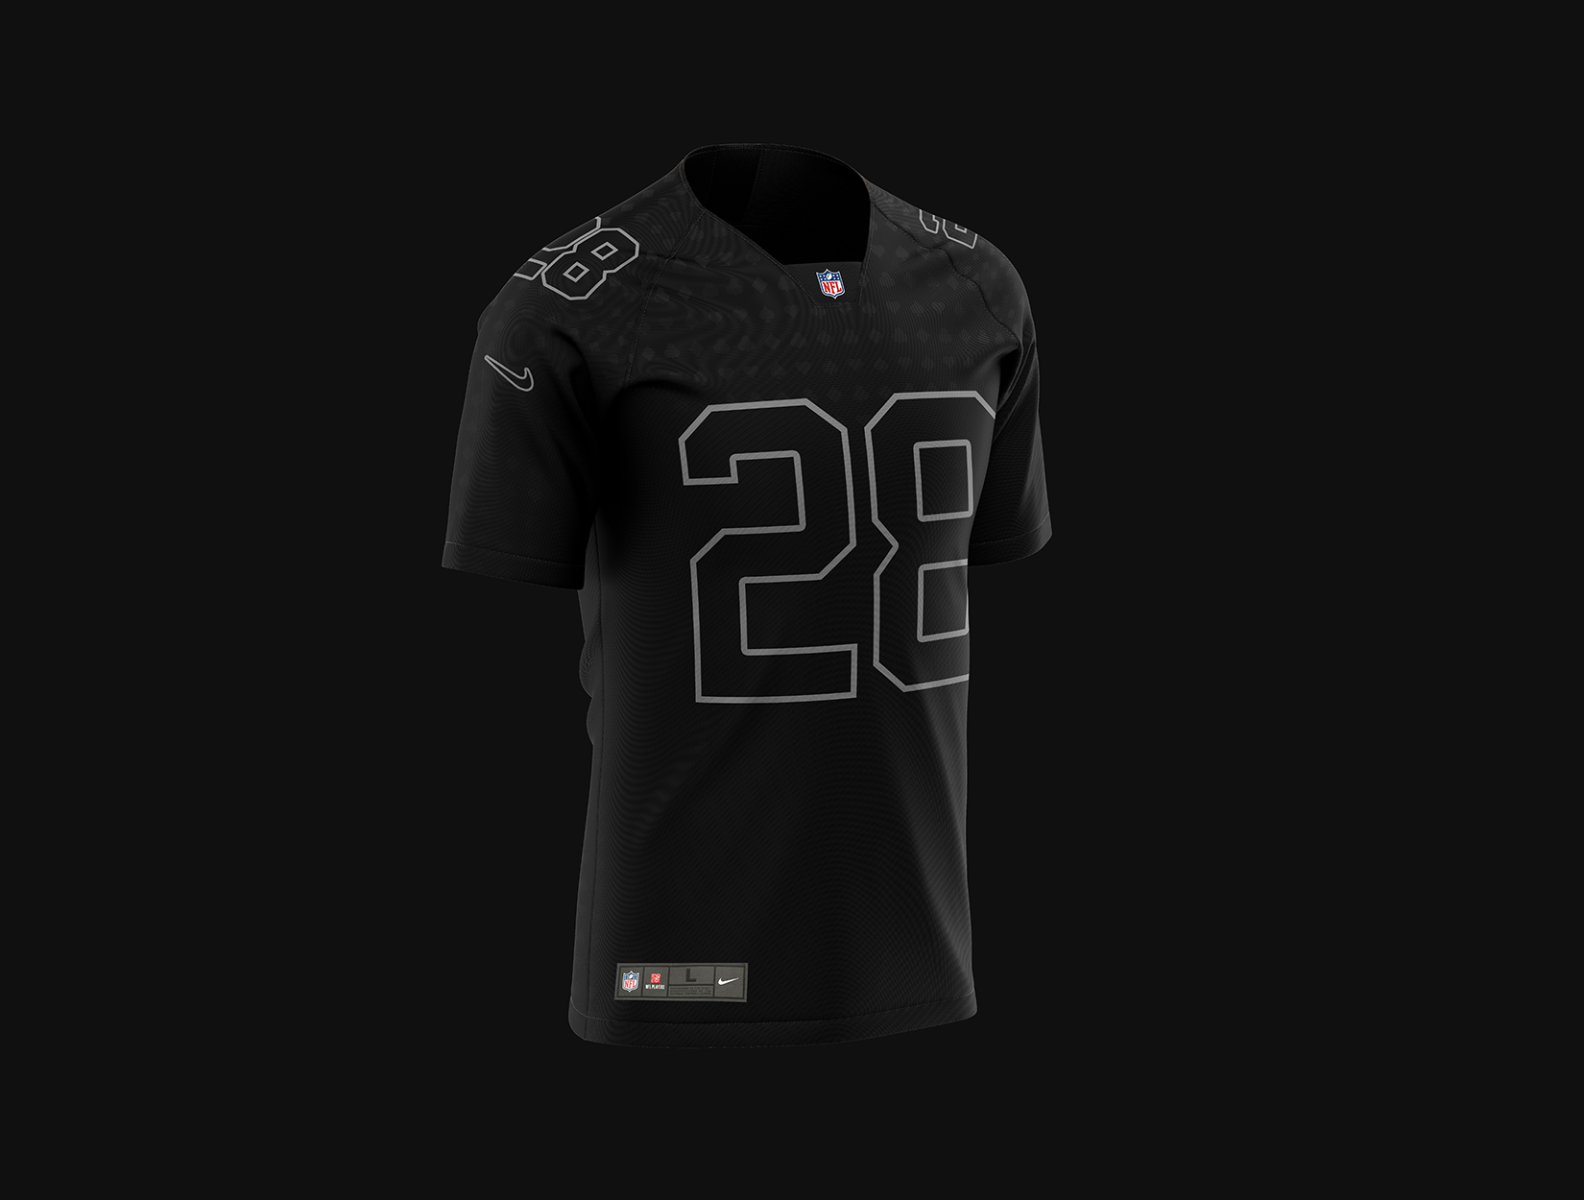 Las Vegas Raiders Concept Jersey 2020 by Luc S. on Dribbble